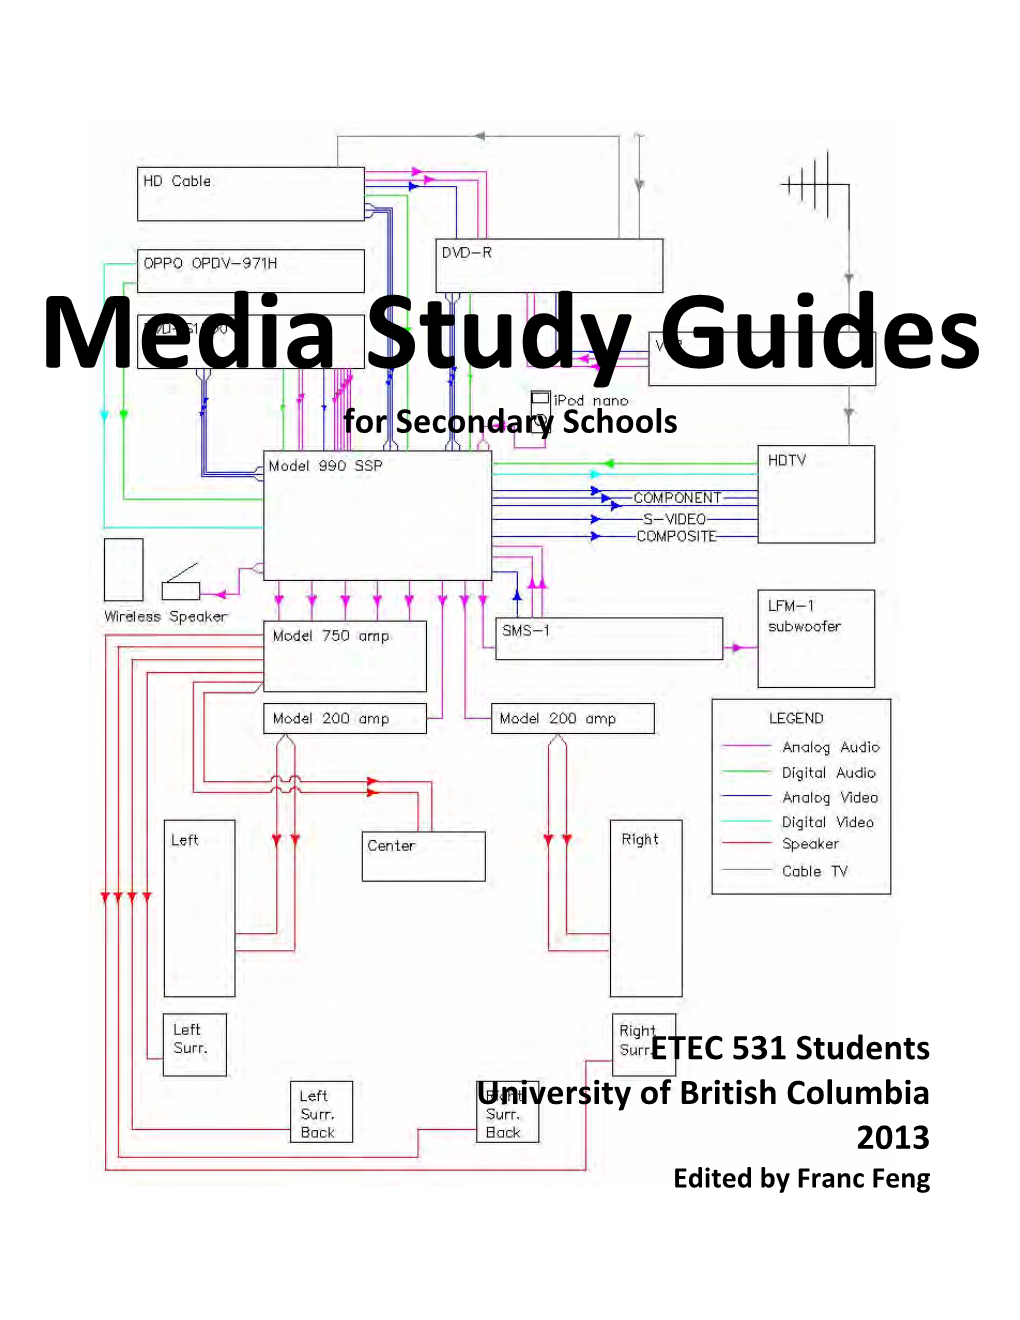 Media Study Guides for Secondary Schools